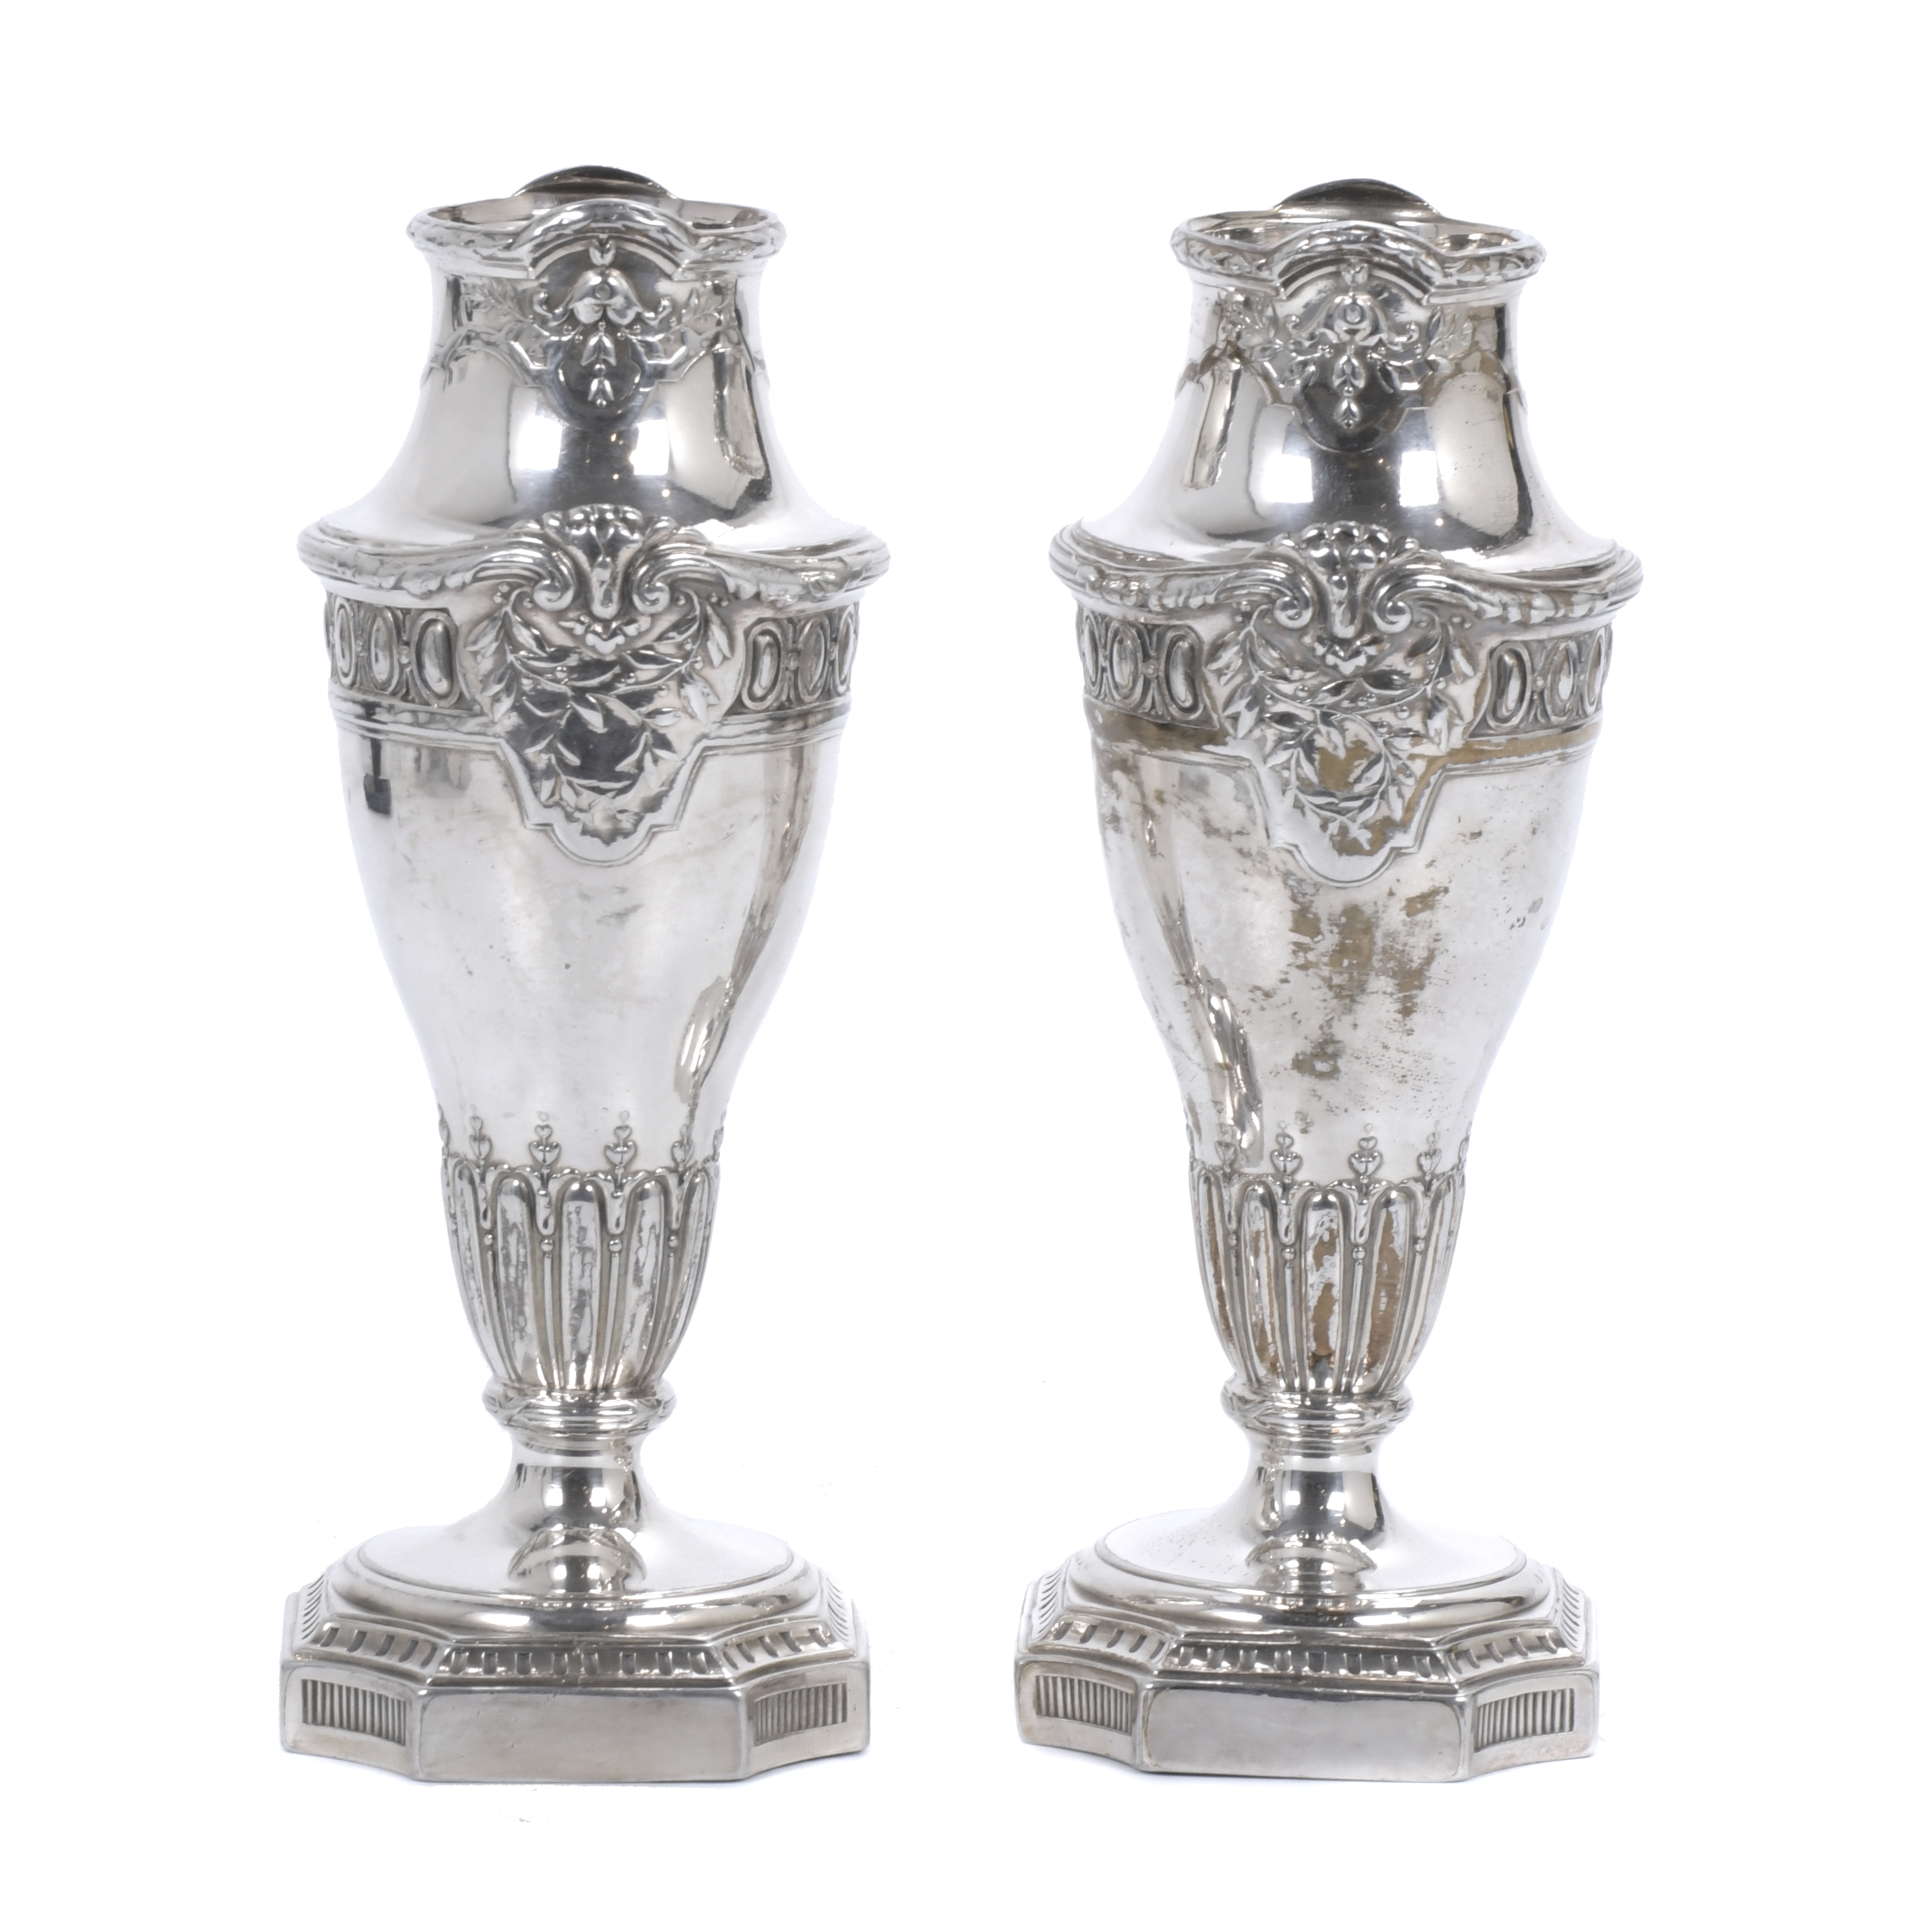 PAIR OF FRENCH ART NOUVEAU SMALL VASES